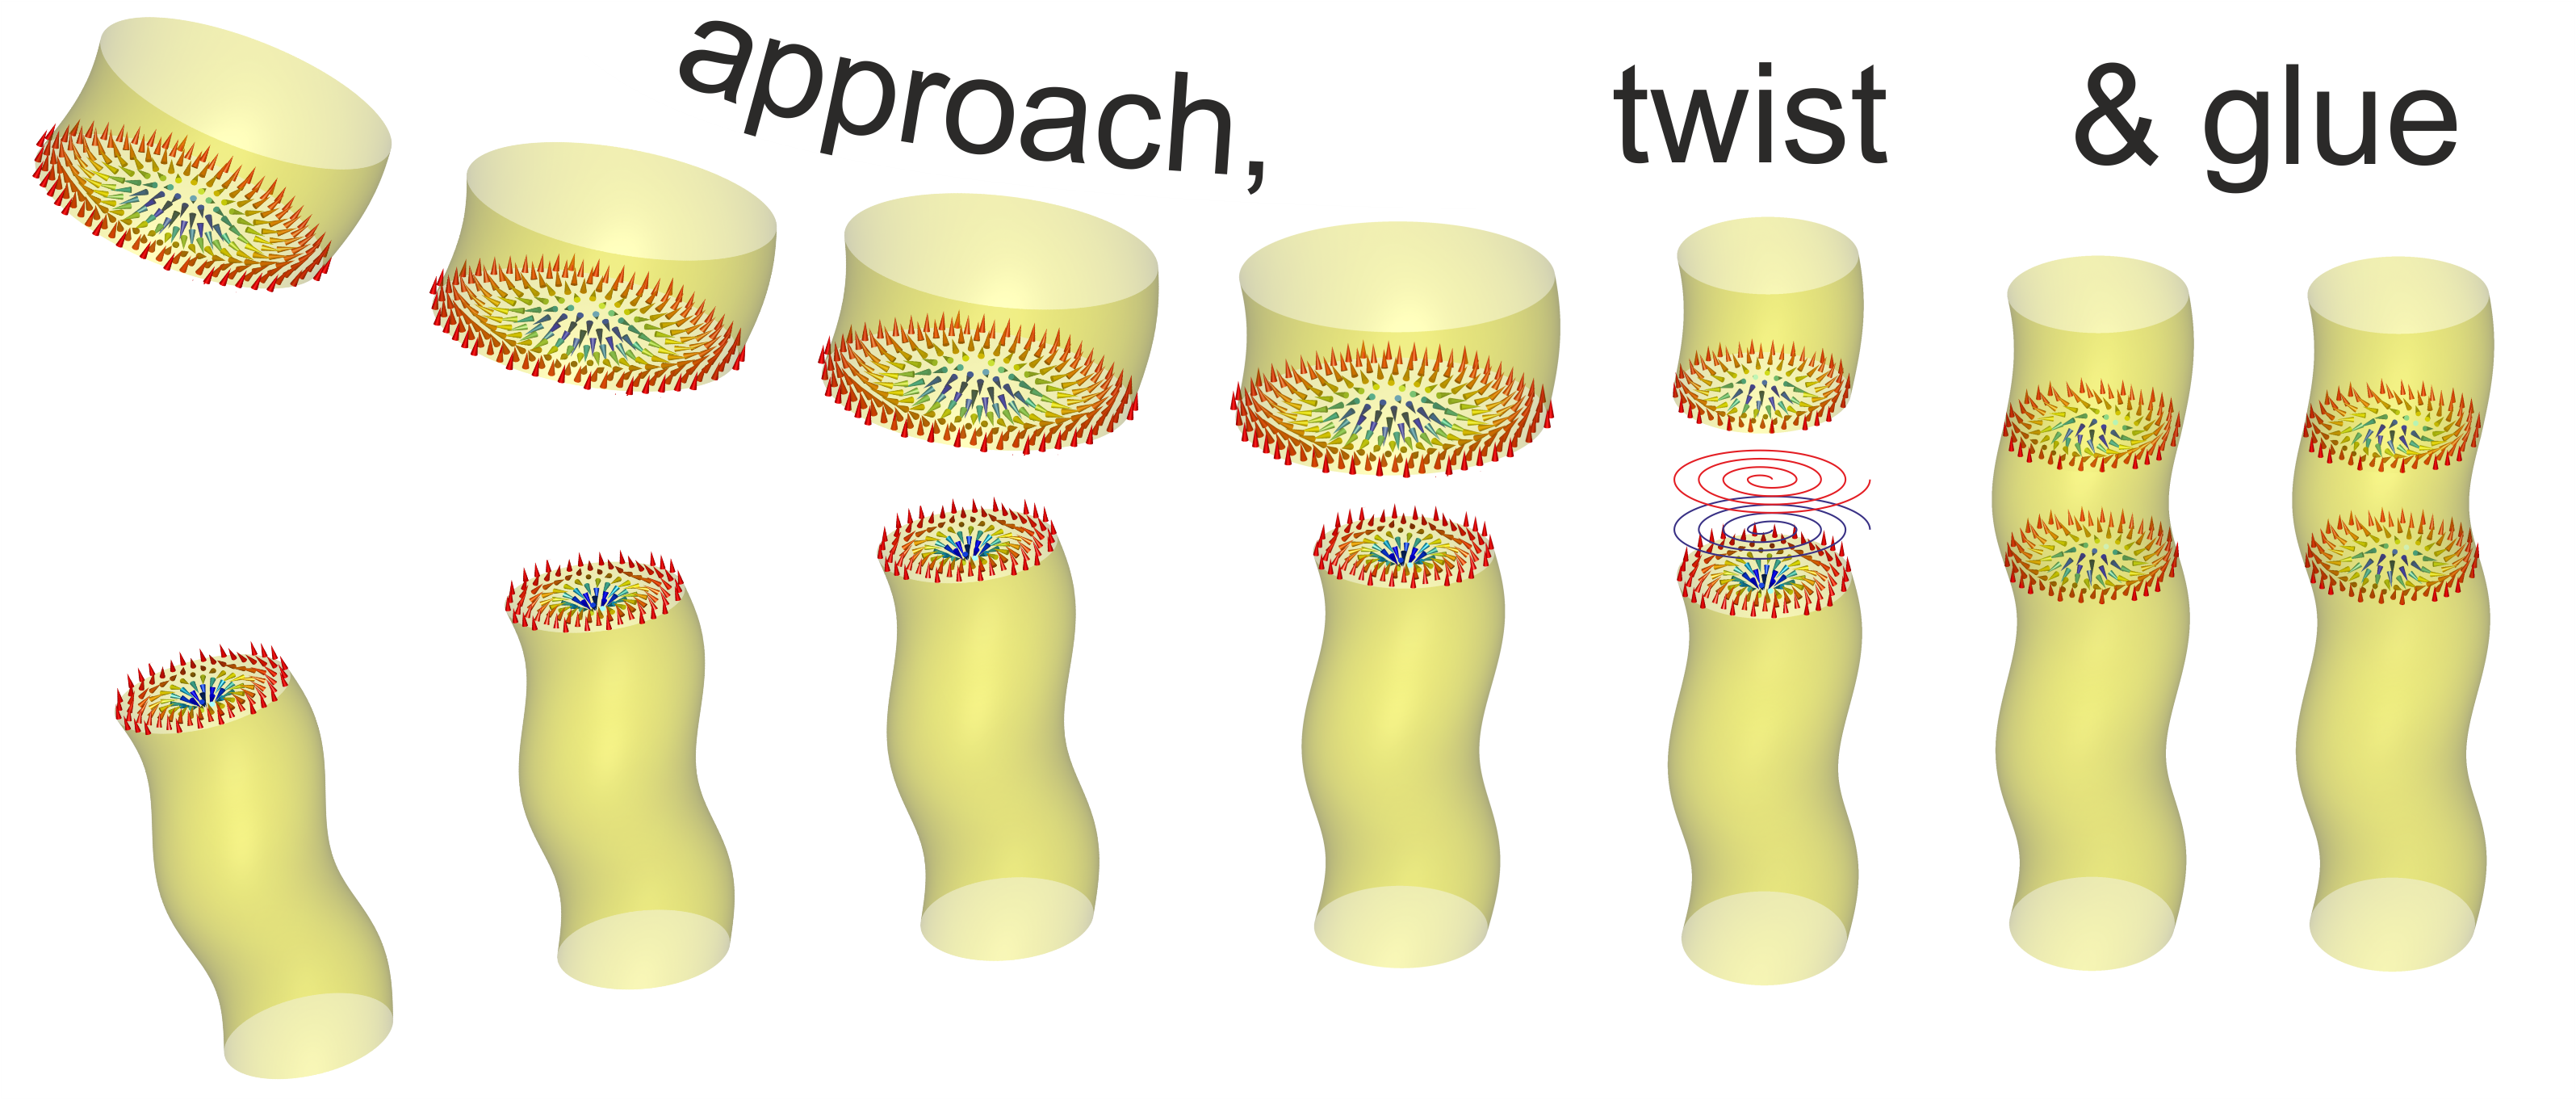 Approach, twist & glue. The glueing of unperturbed, dissimilar skyrmion strings across an interface, as they approach each other due the attraction of their cores, is facilitated by twisting. By changing their internal spin structure near the interface, both skyrmions adapt to each another both in terms of twist and size, forming a continuous skyrmion string as a result.